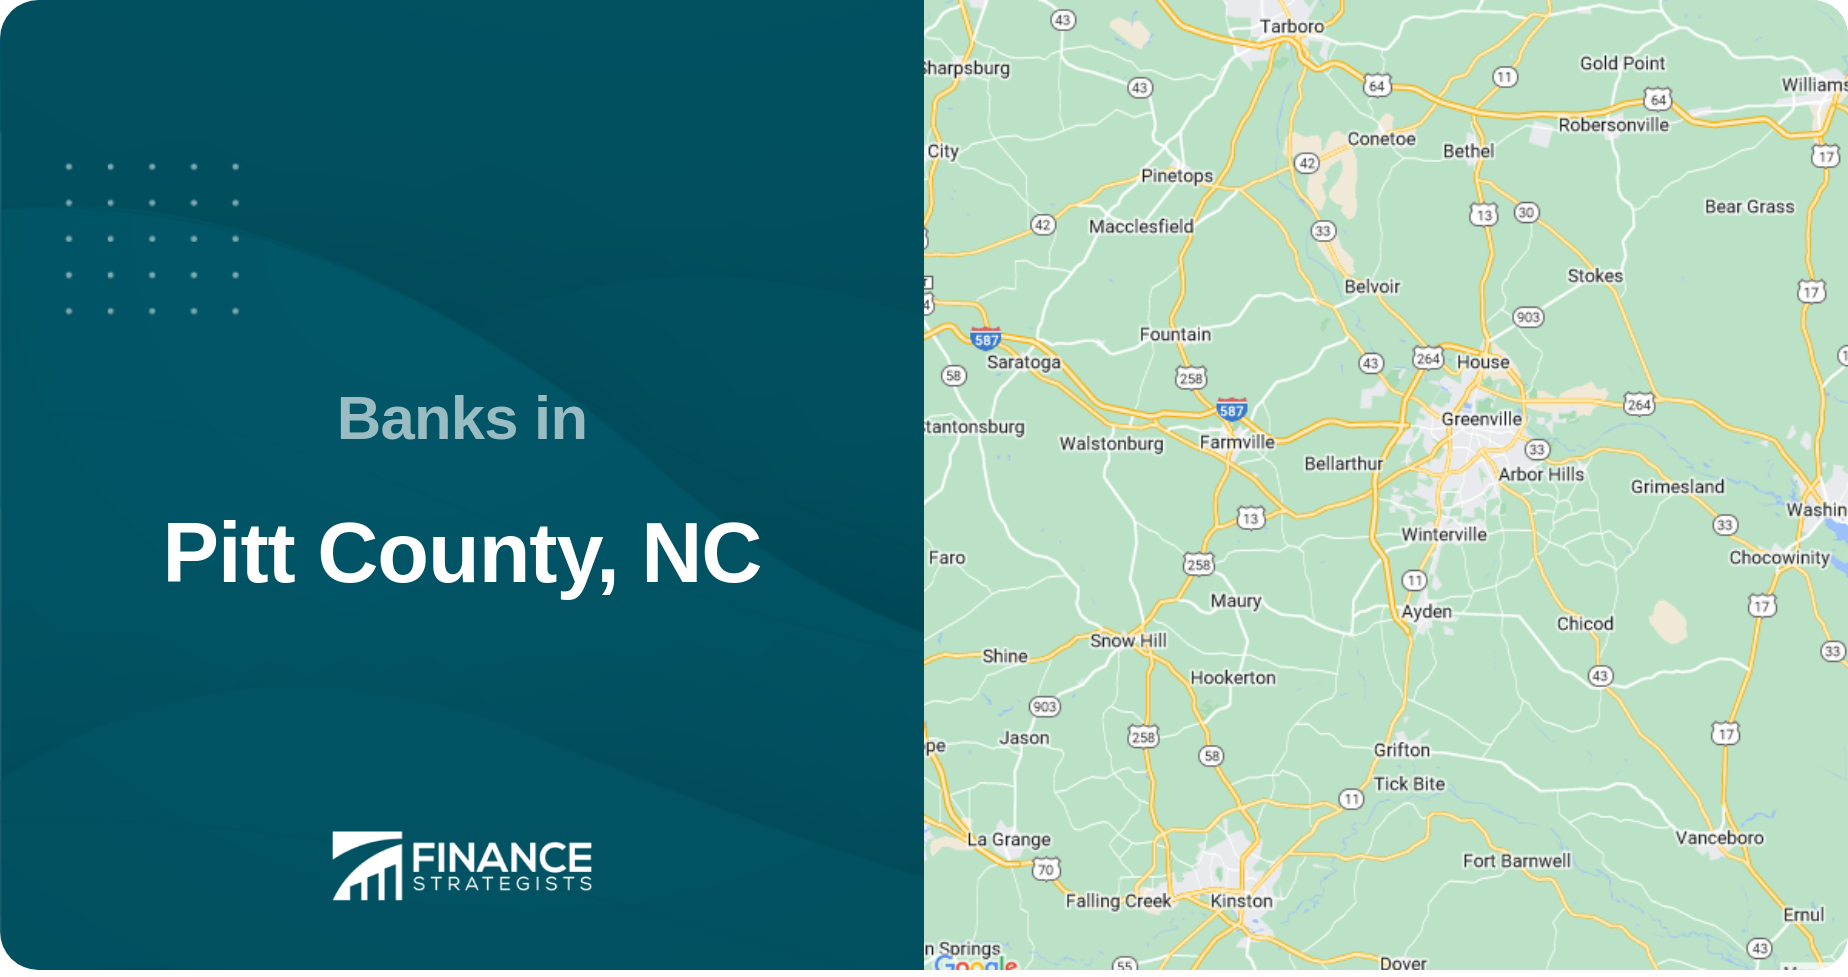 Banks in Pitt County, NC